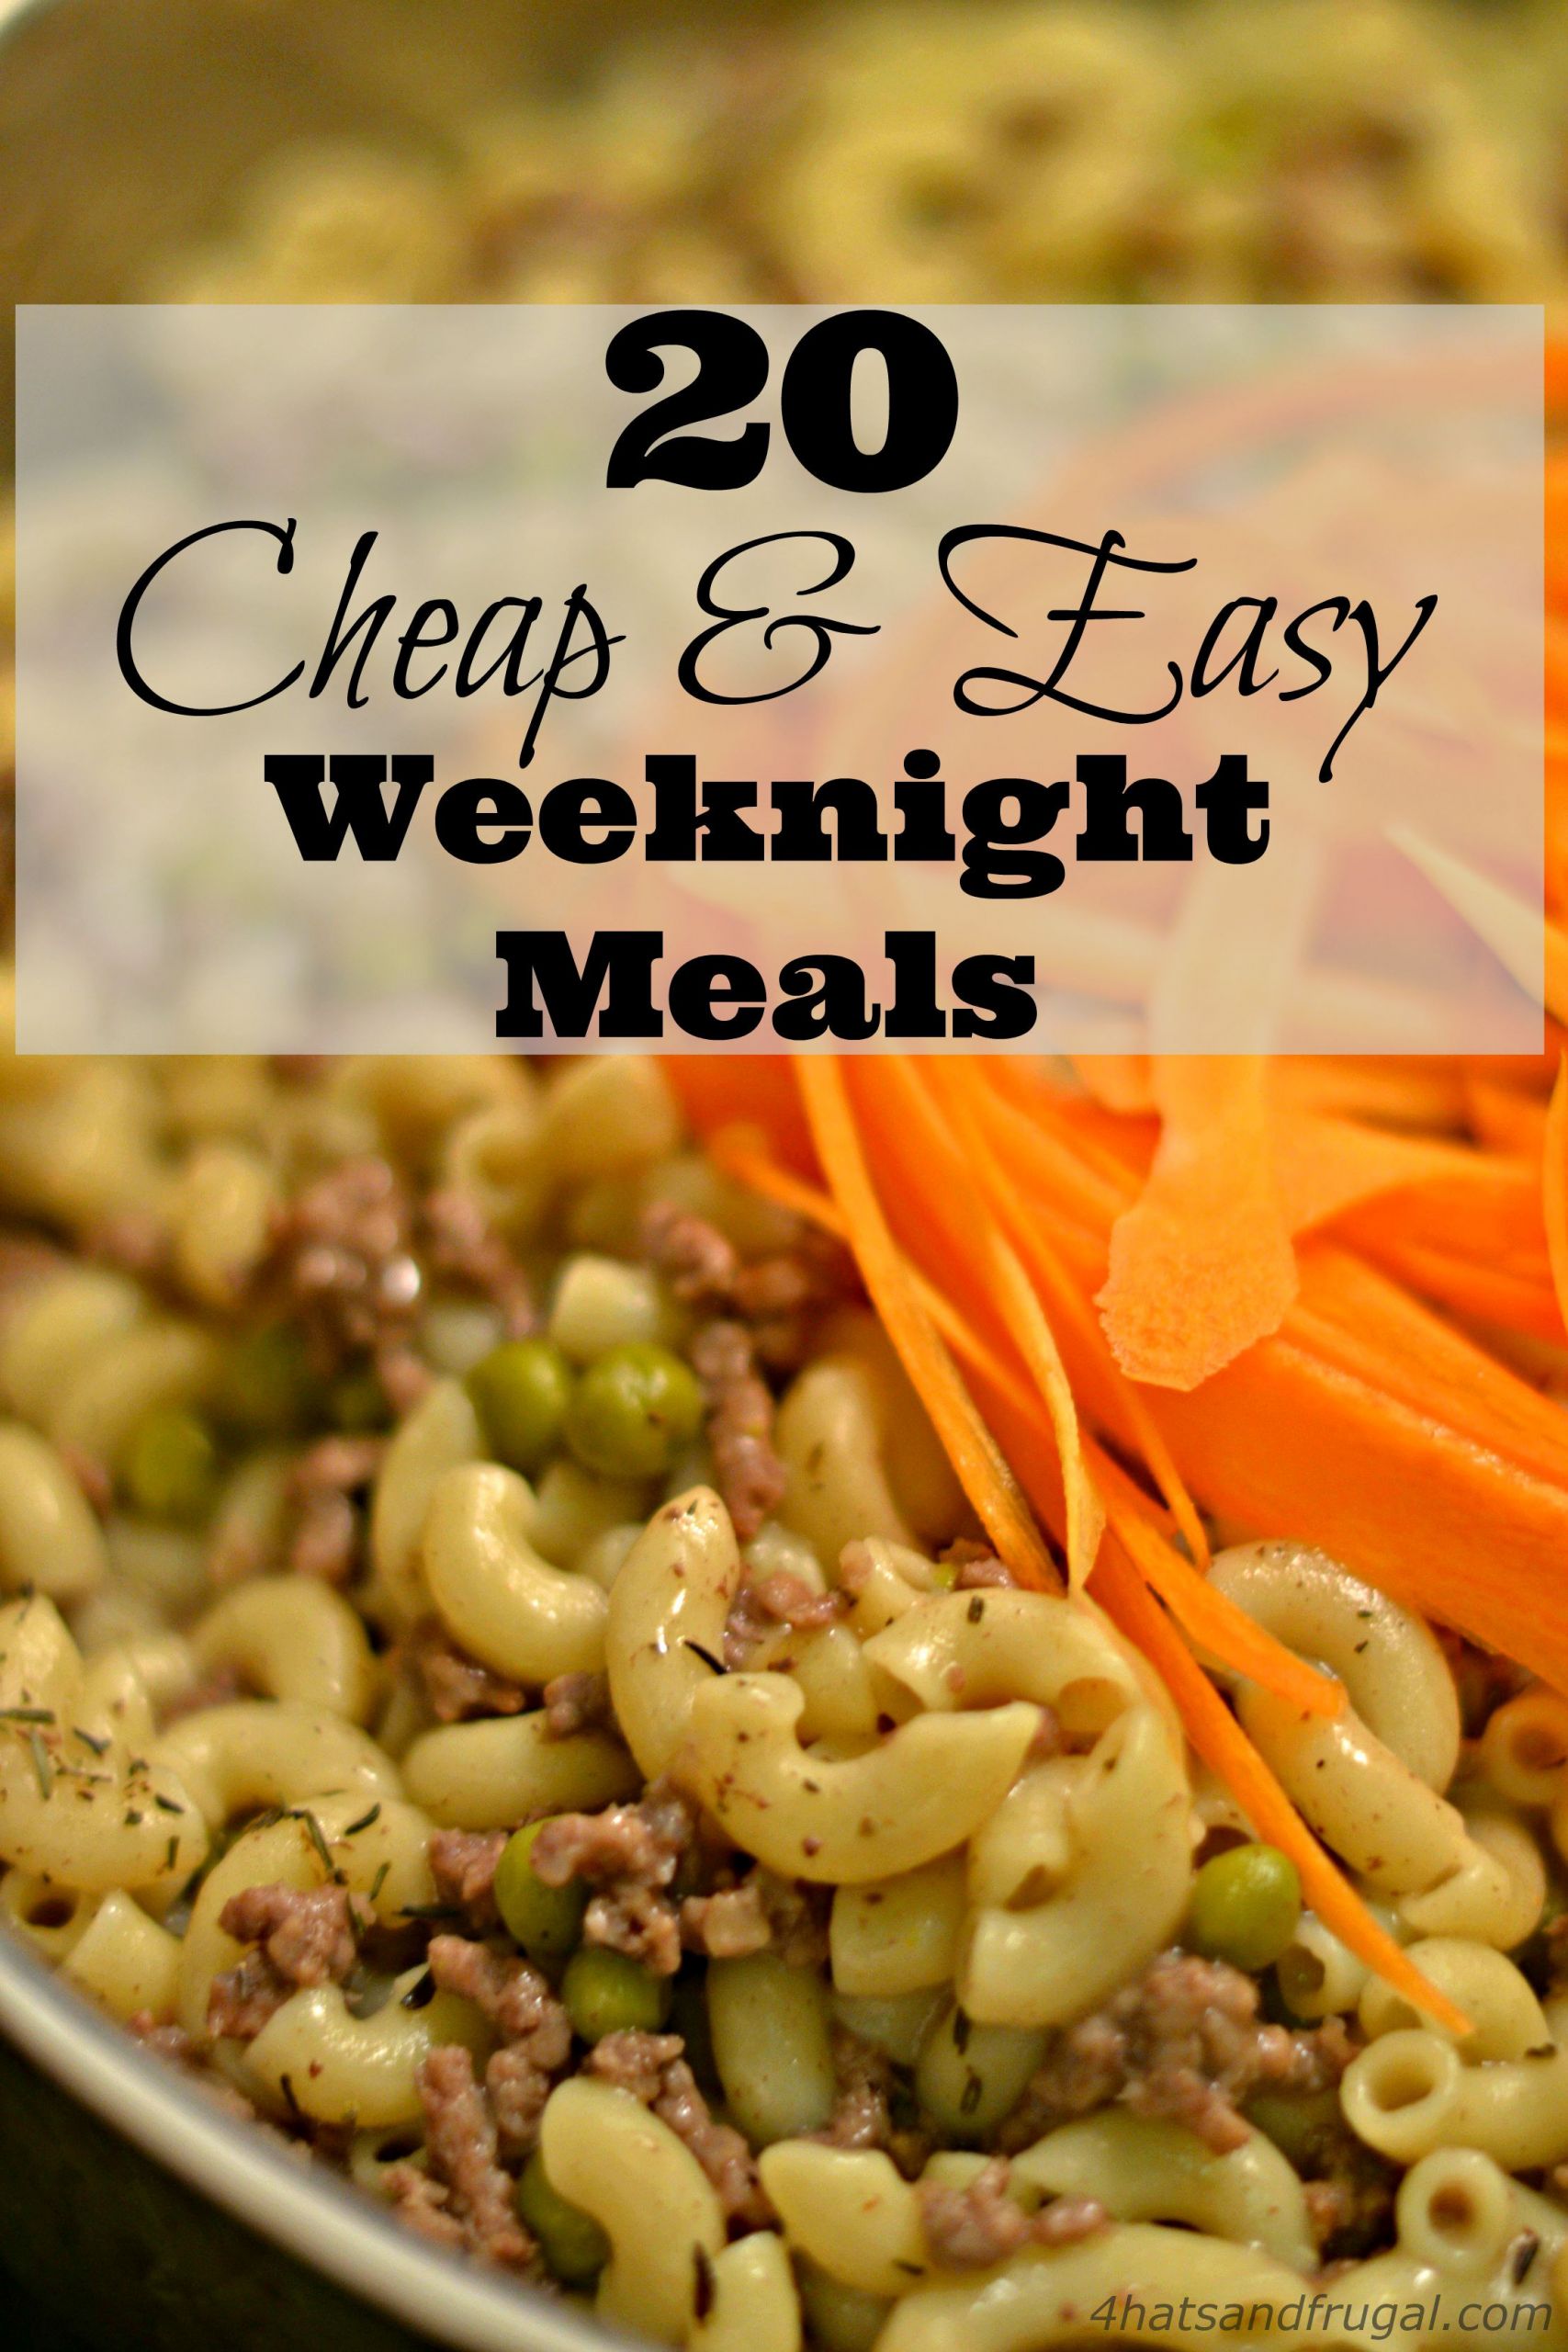 Cheap Dinner Recipes
 20 Cheap & Easy Weeknight Meals 4 Hats and Frugal